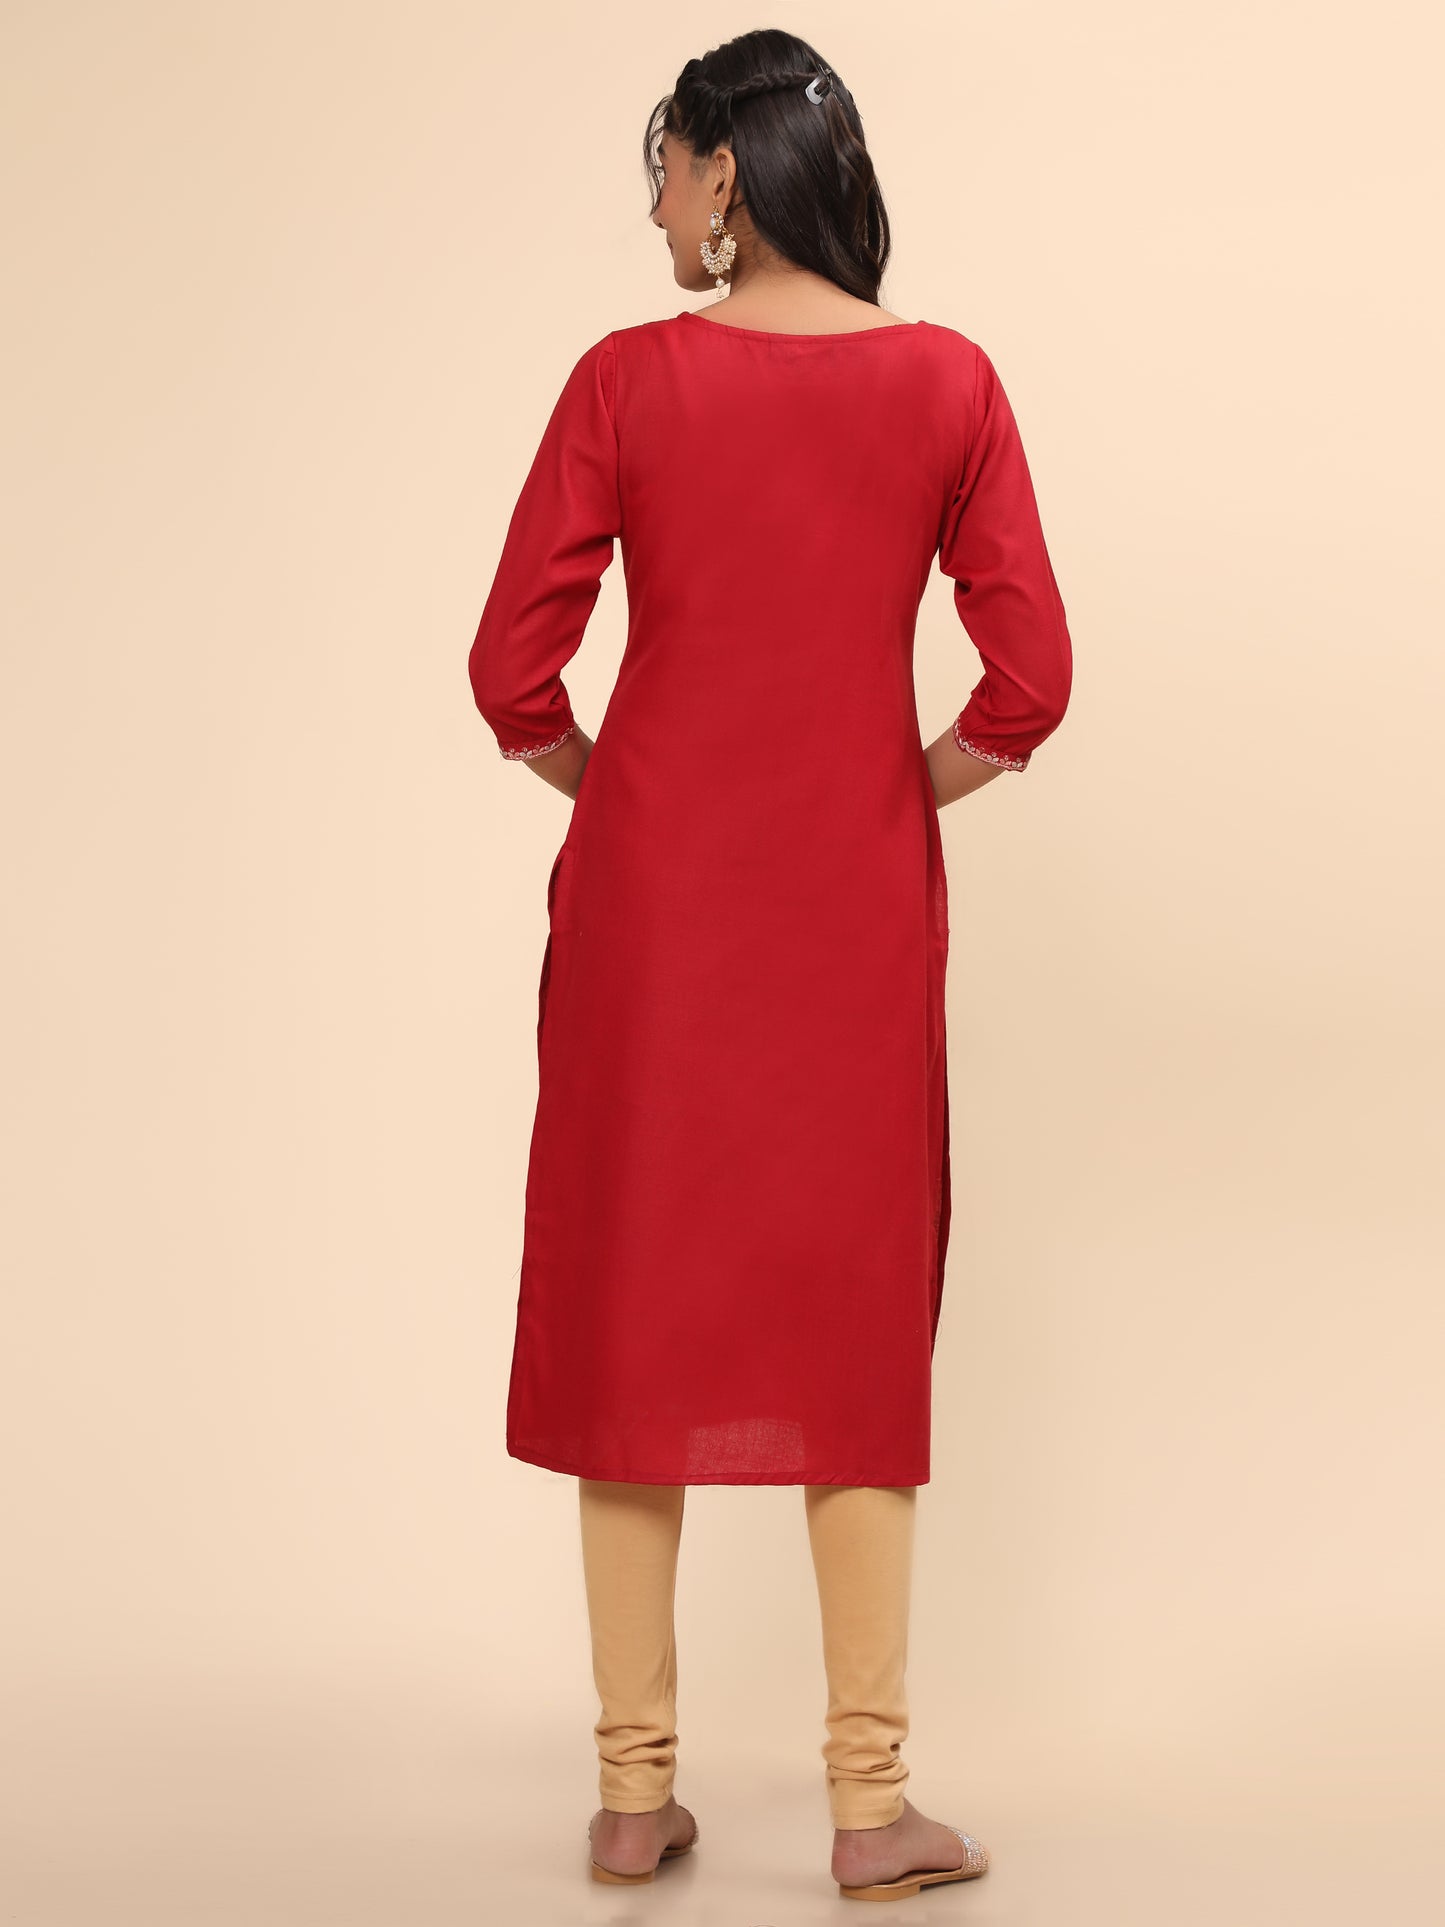 Red Embroidered Straight Cotton Blend Kurta